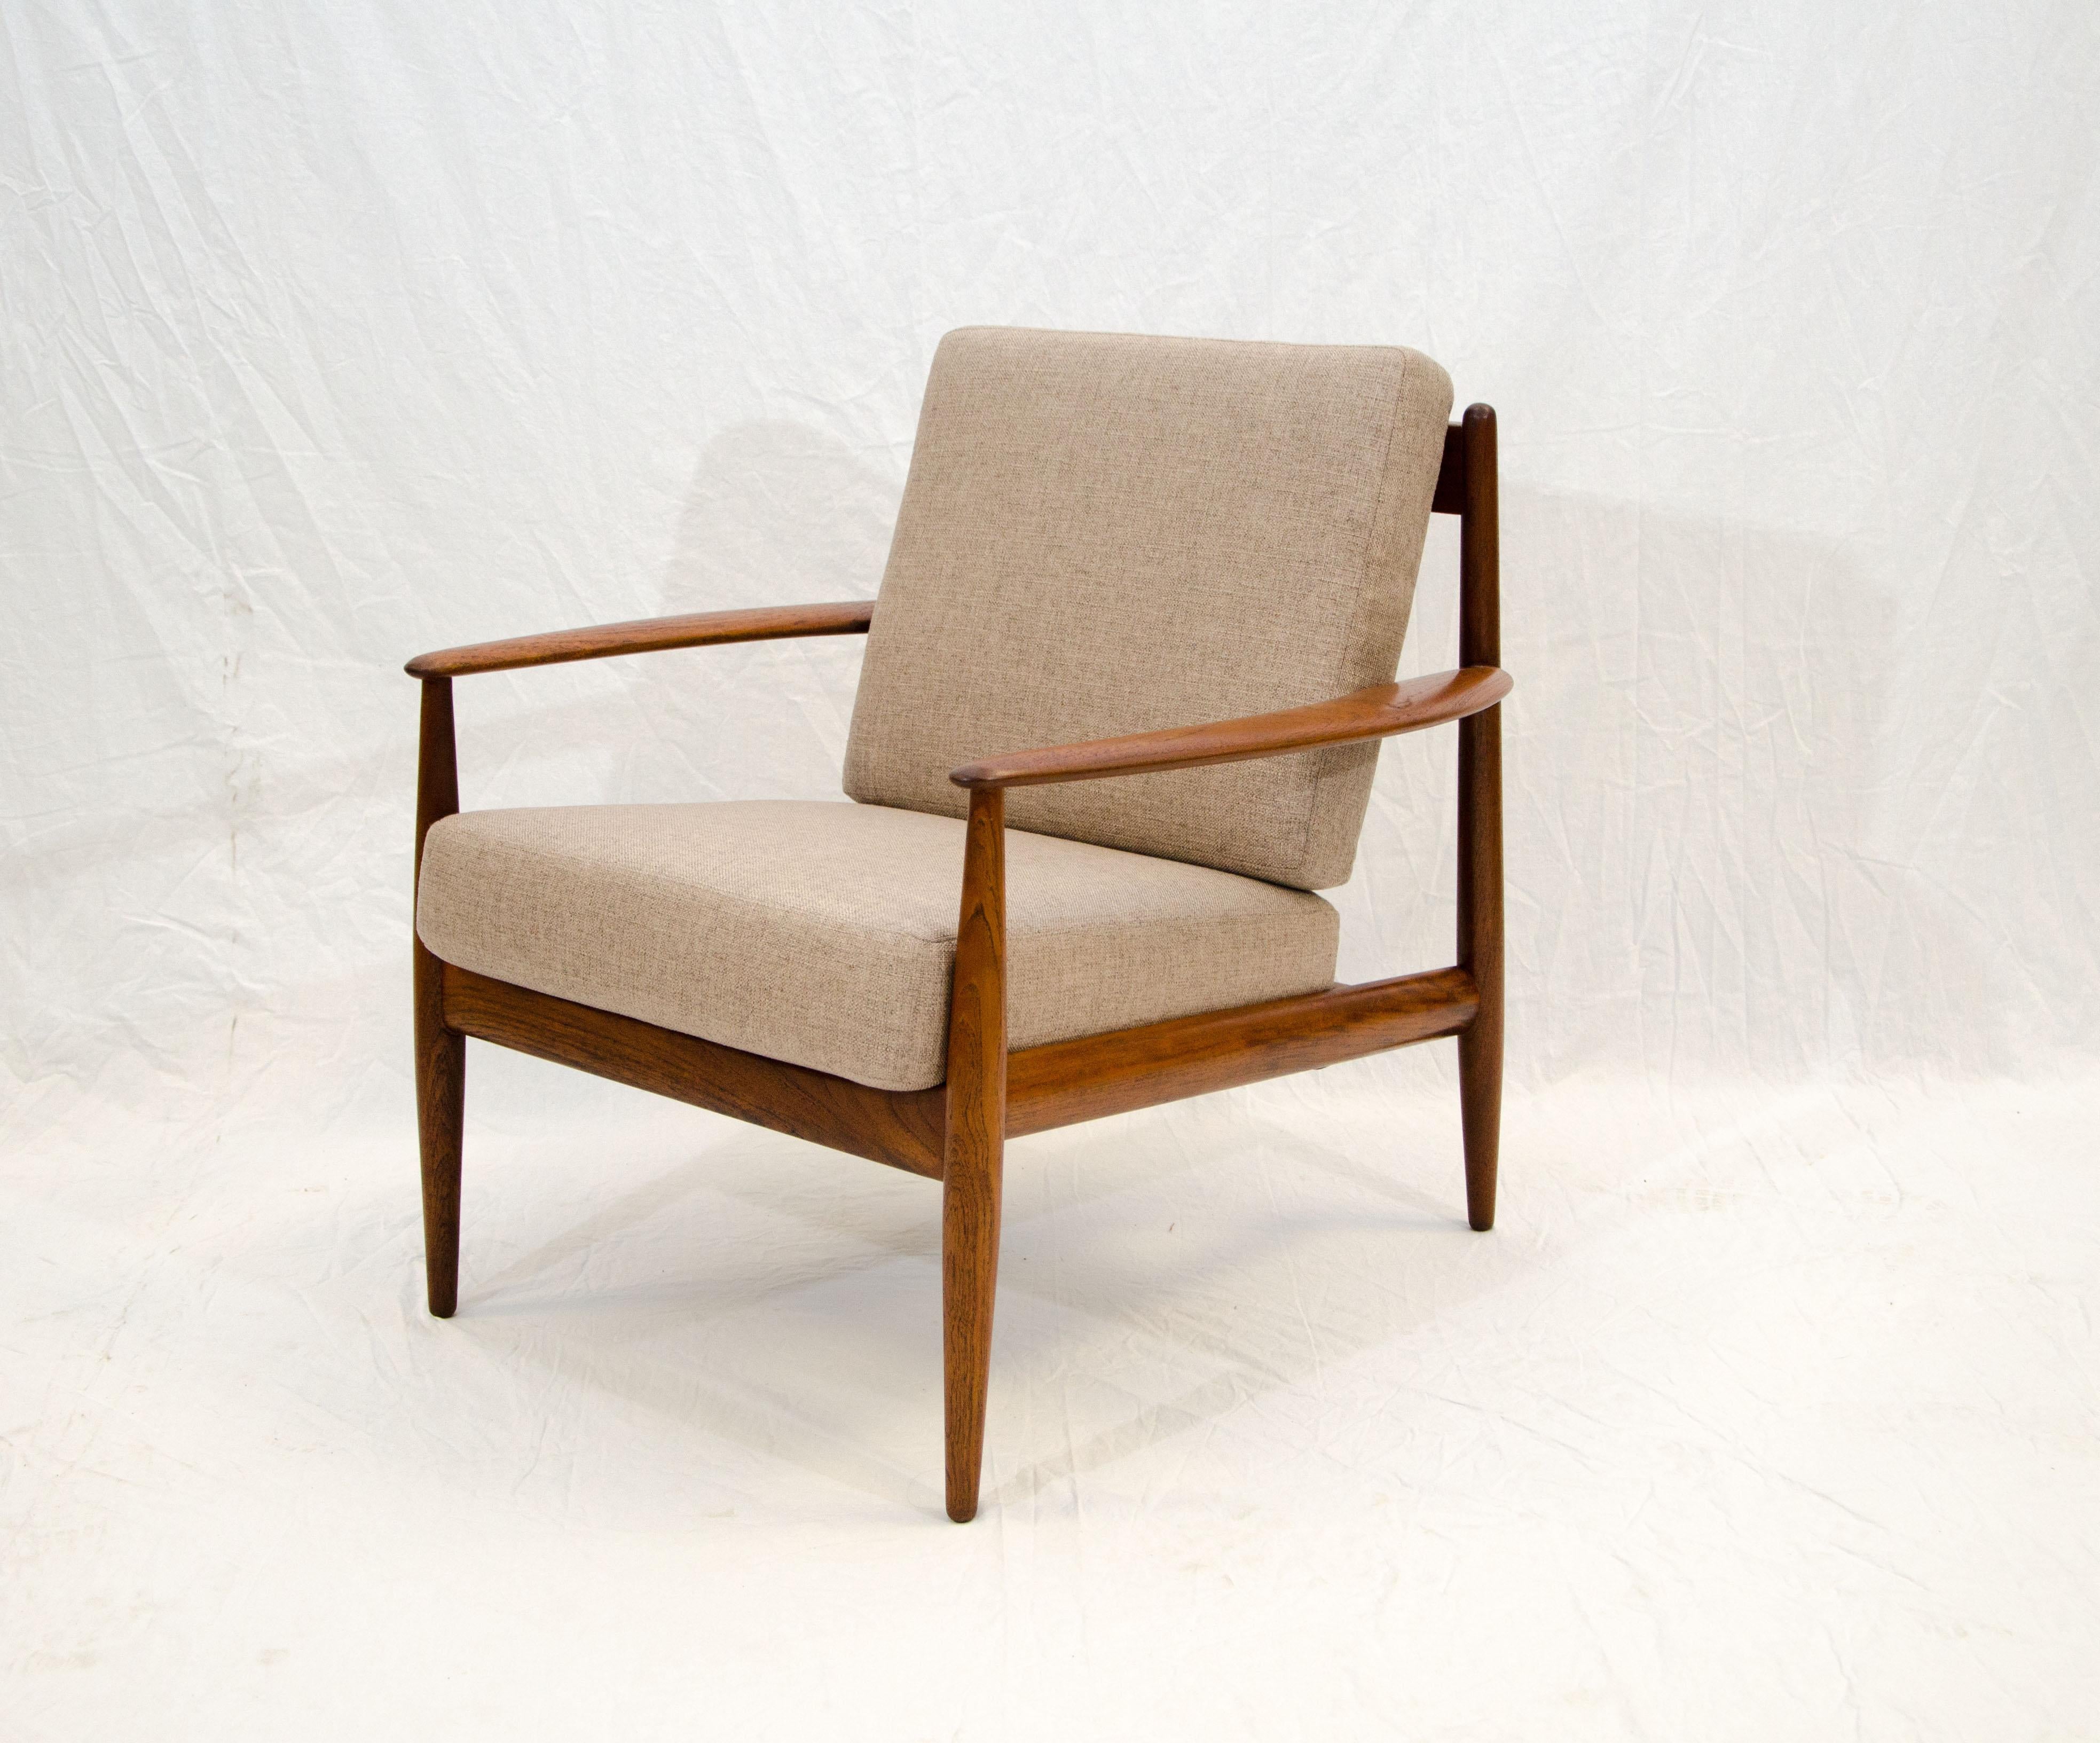 Nice Danish teak lounge chair, designed by Grete Jalk, with sculptural curved arms that measure 4